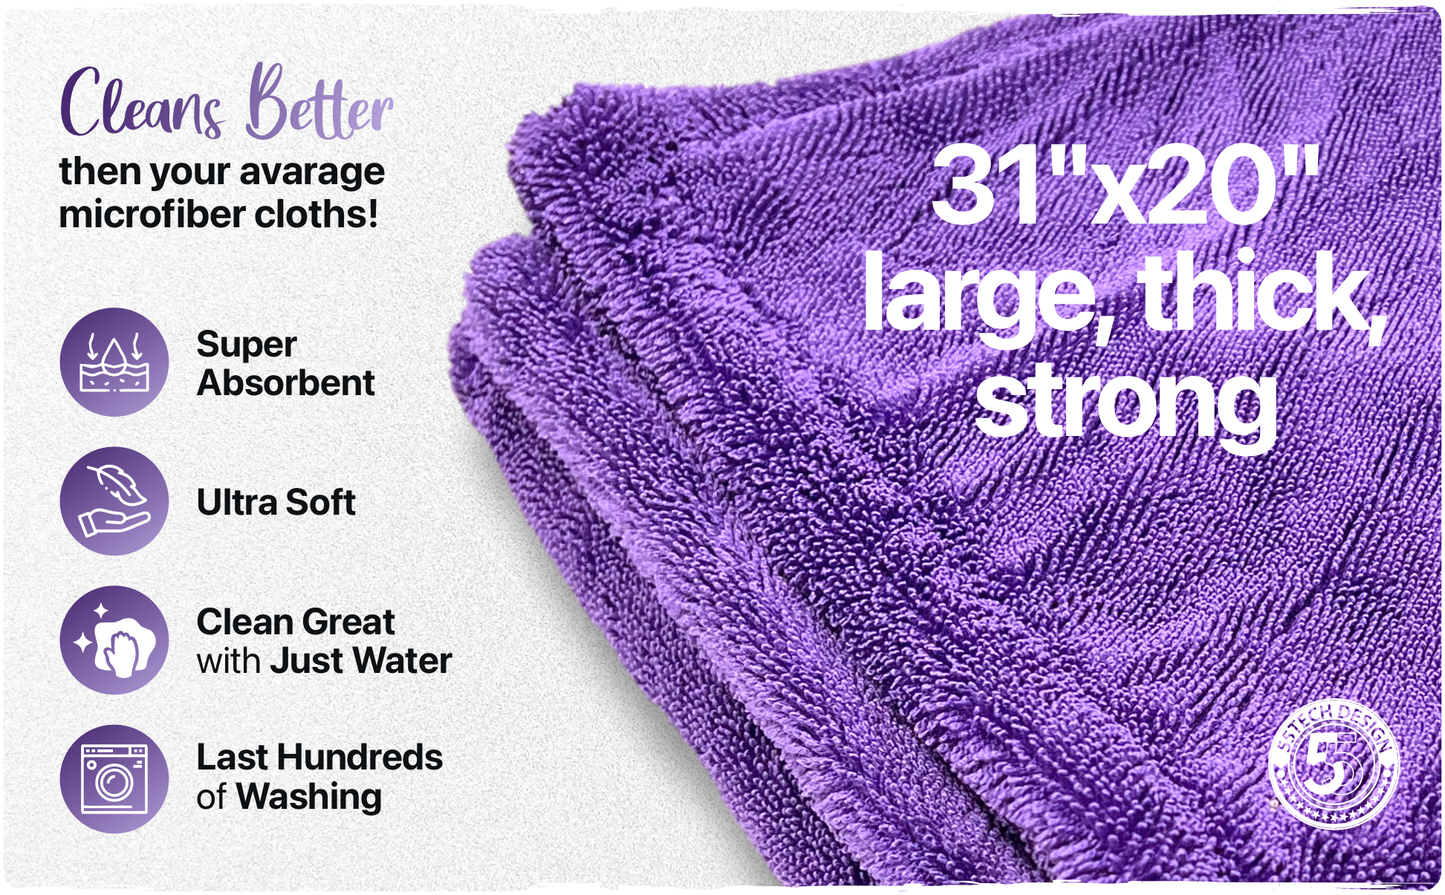 55tech Fast Drying Towels for Car Wash Dry & Clean Microfiber Towel - Twist-Loop Pile - for Faster One-Pass Vehicle Cleaning & Detailing Trucks SUVs Boats - Superior Absorbency